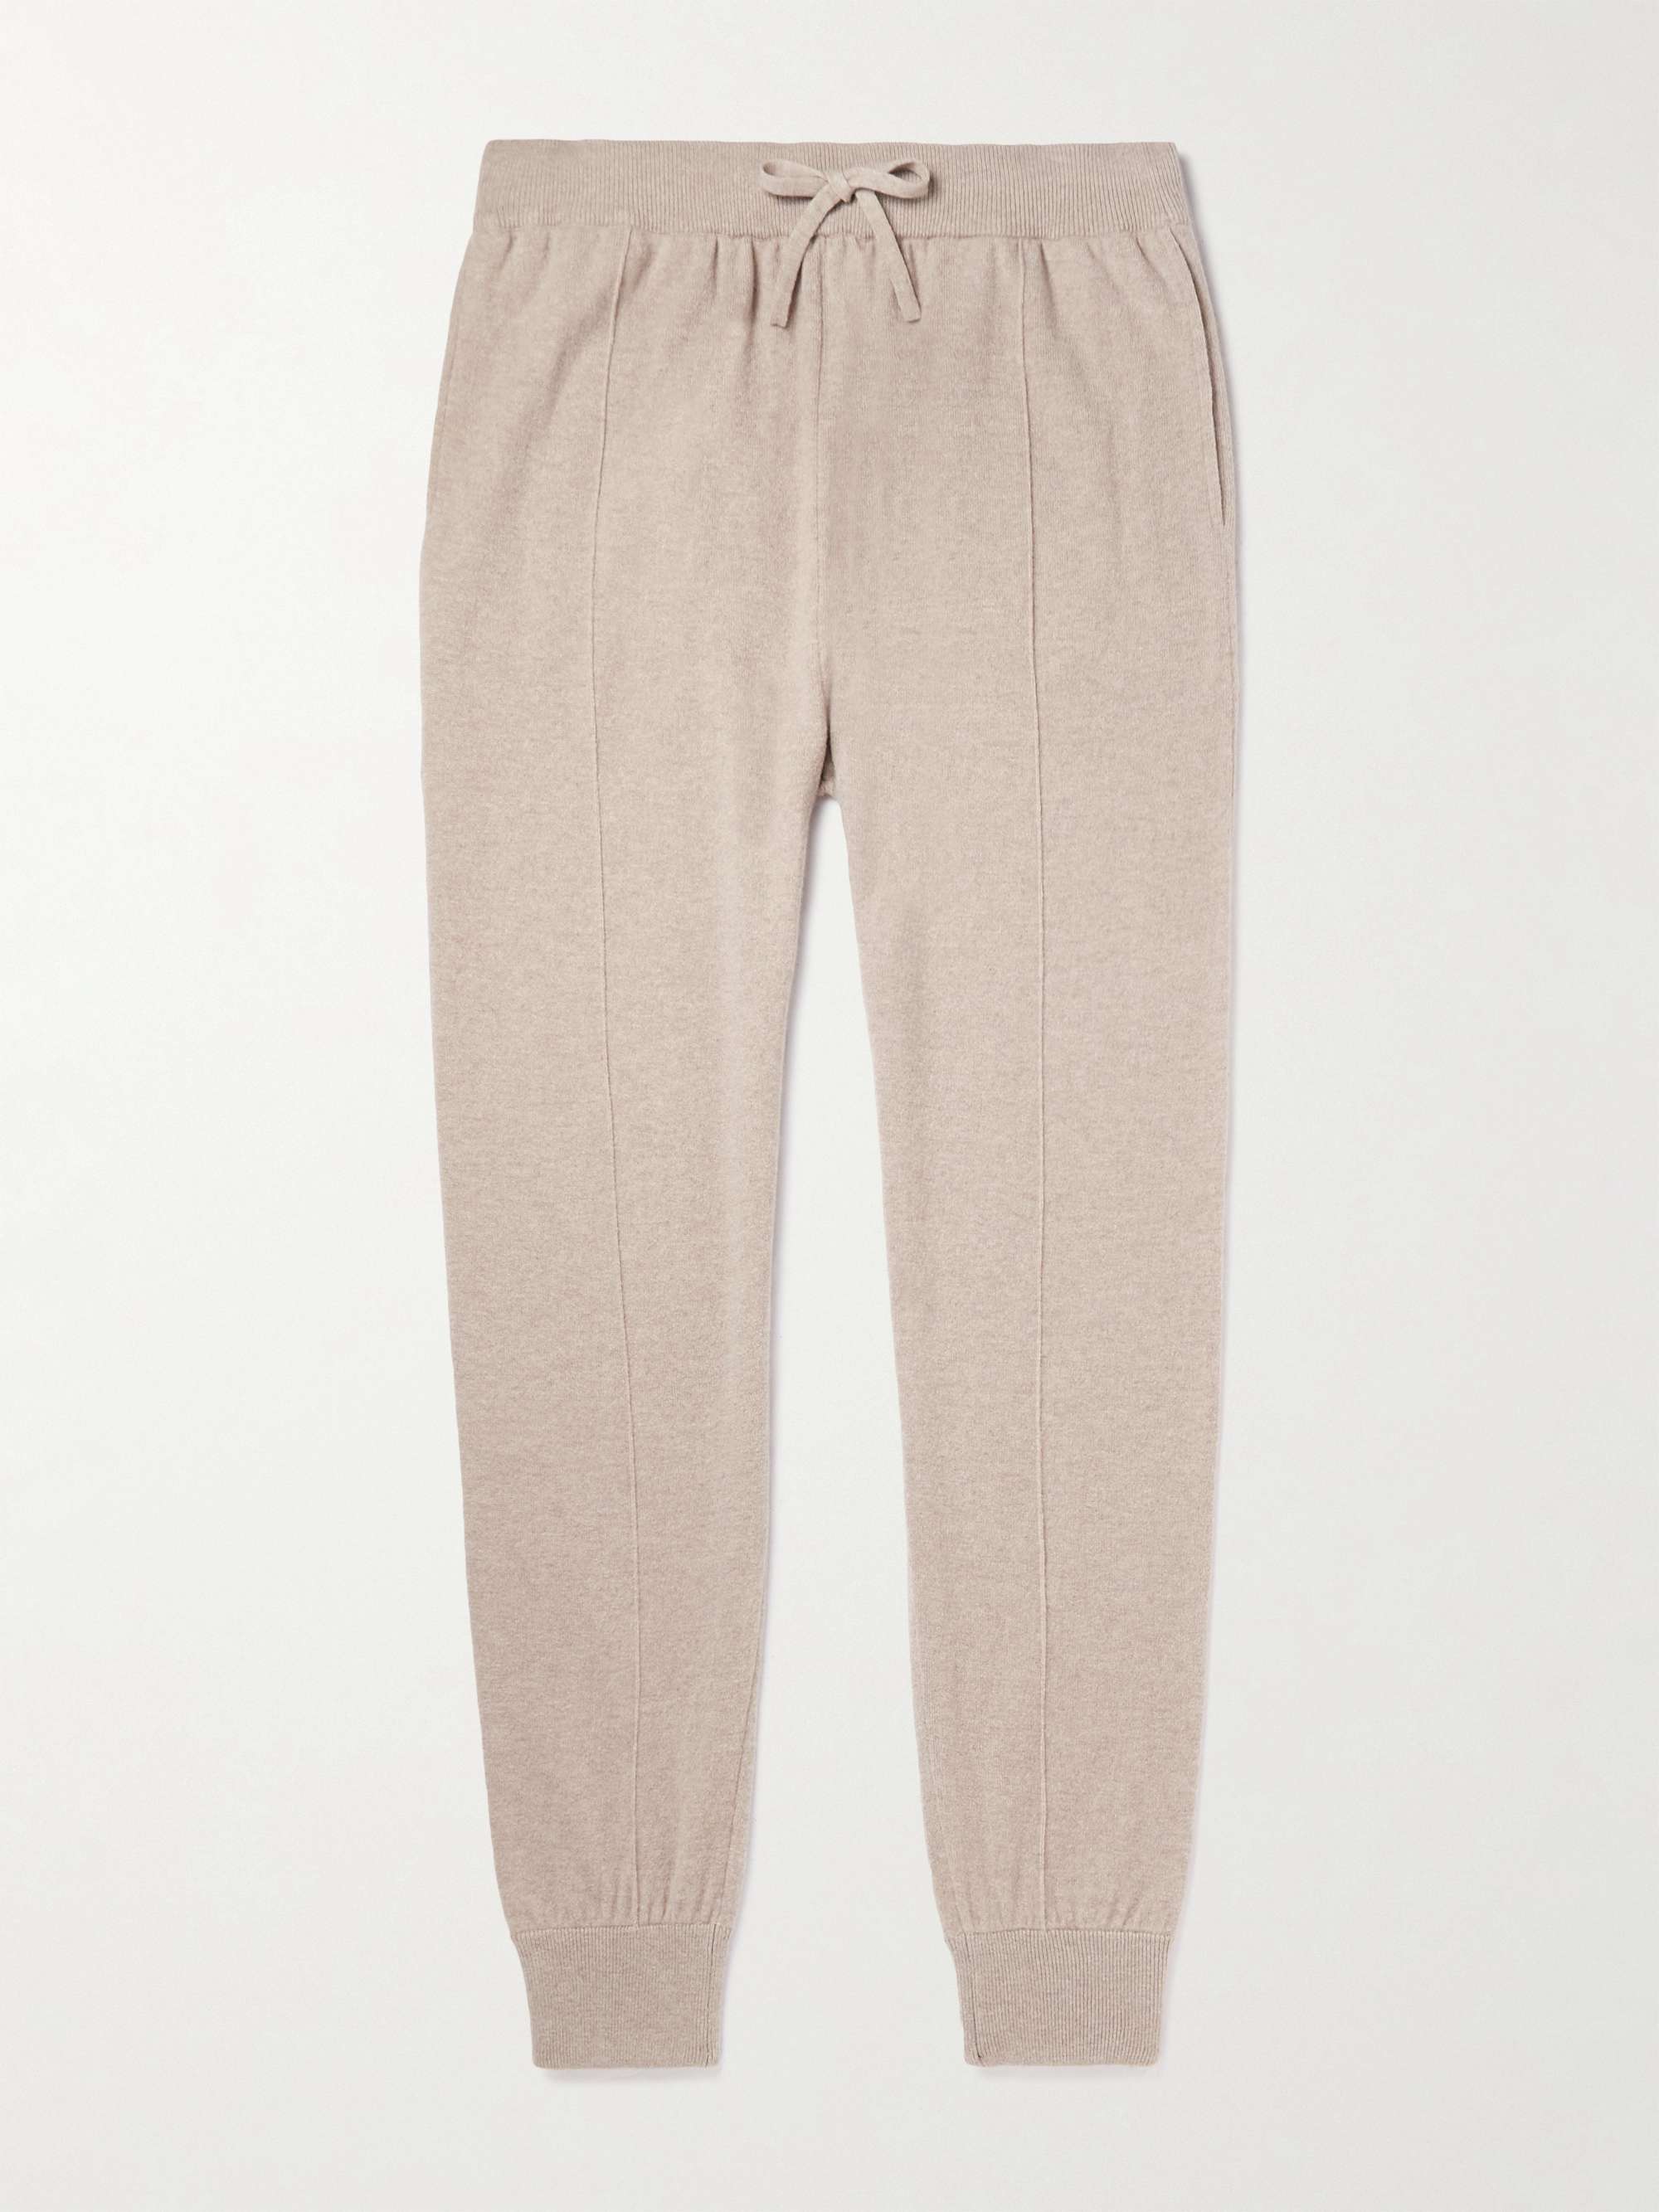 MR P. Tapered Pintucked Wool and Cashmere-Blend Sweatpants for Men